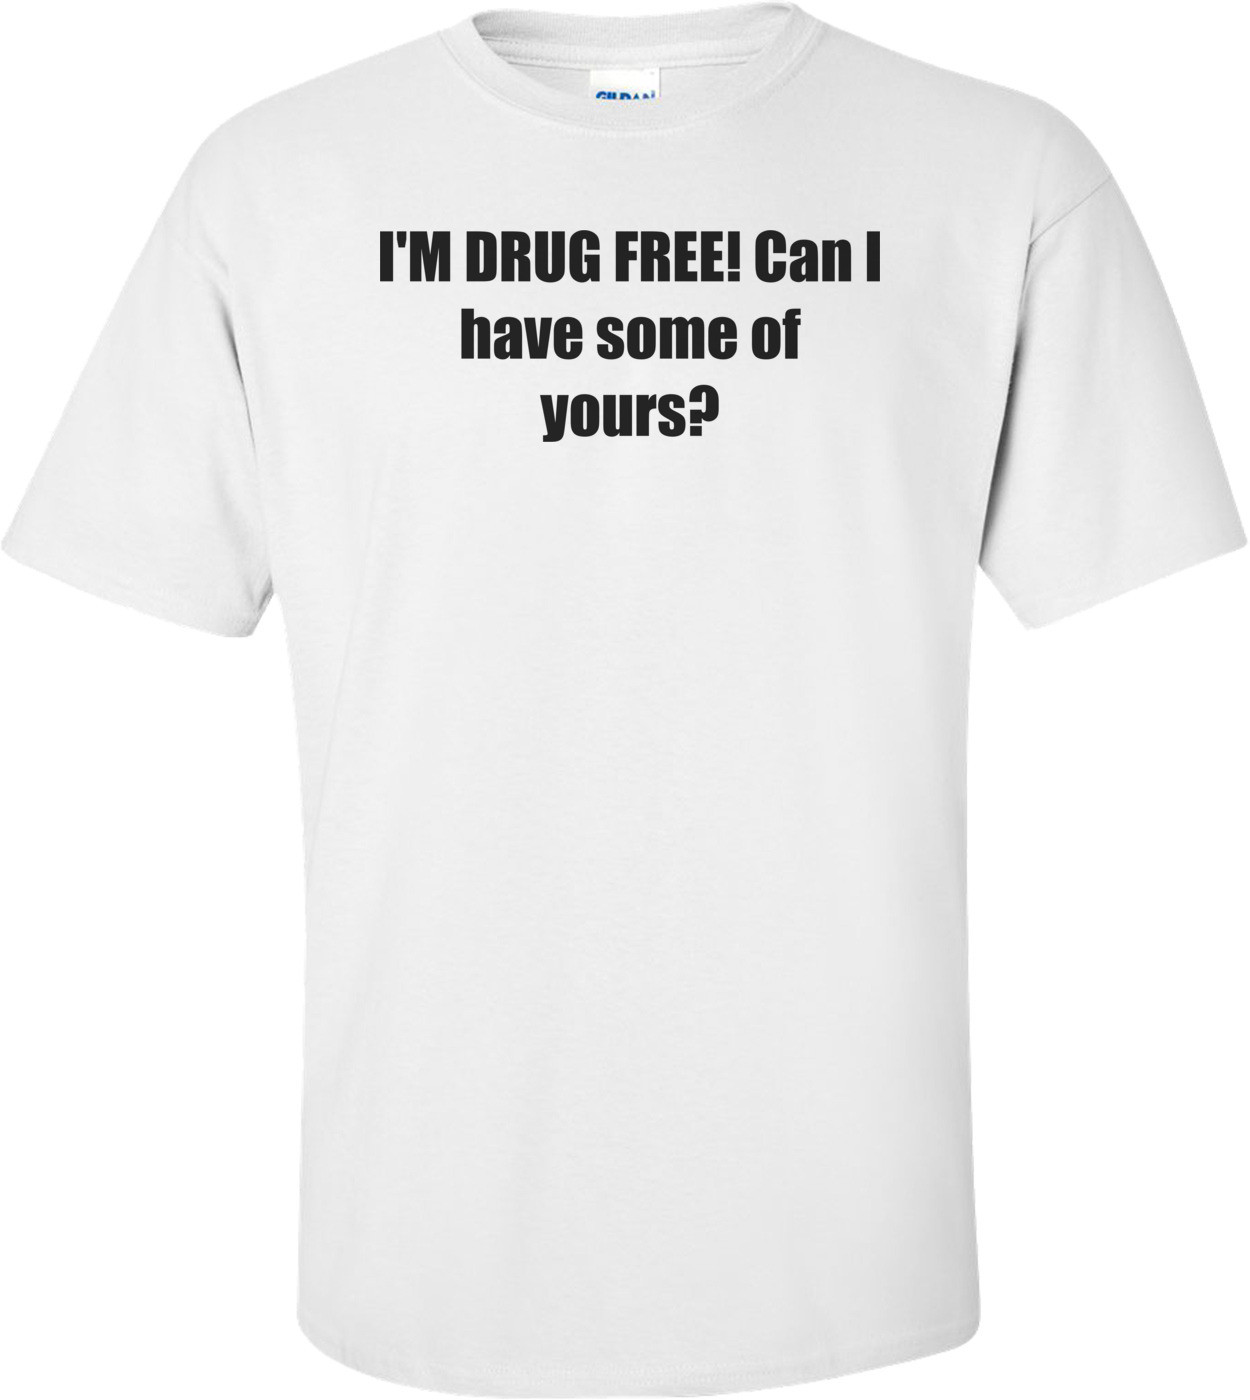 I'M DRUG FREE! Can I have some of yours? Shirt